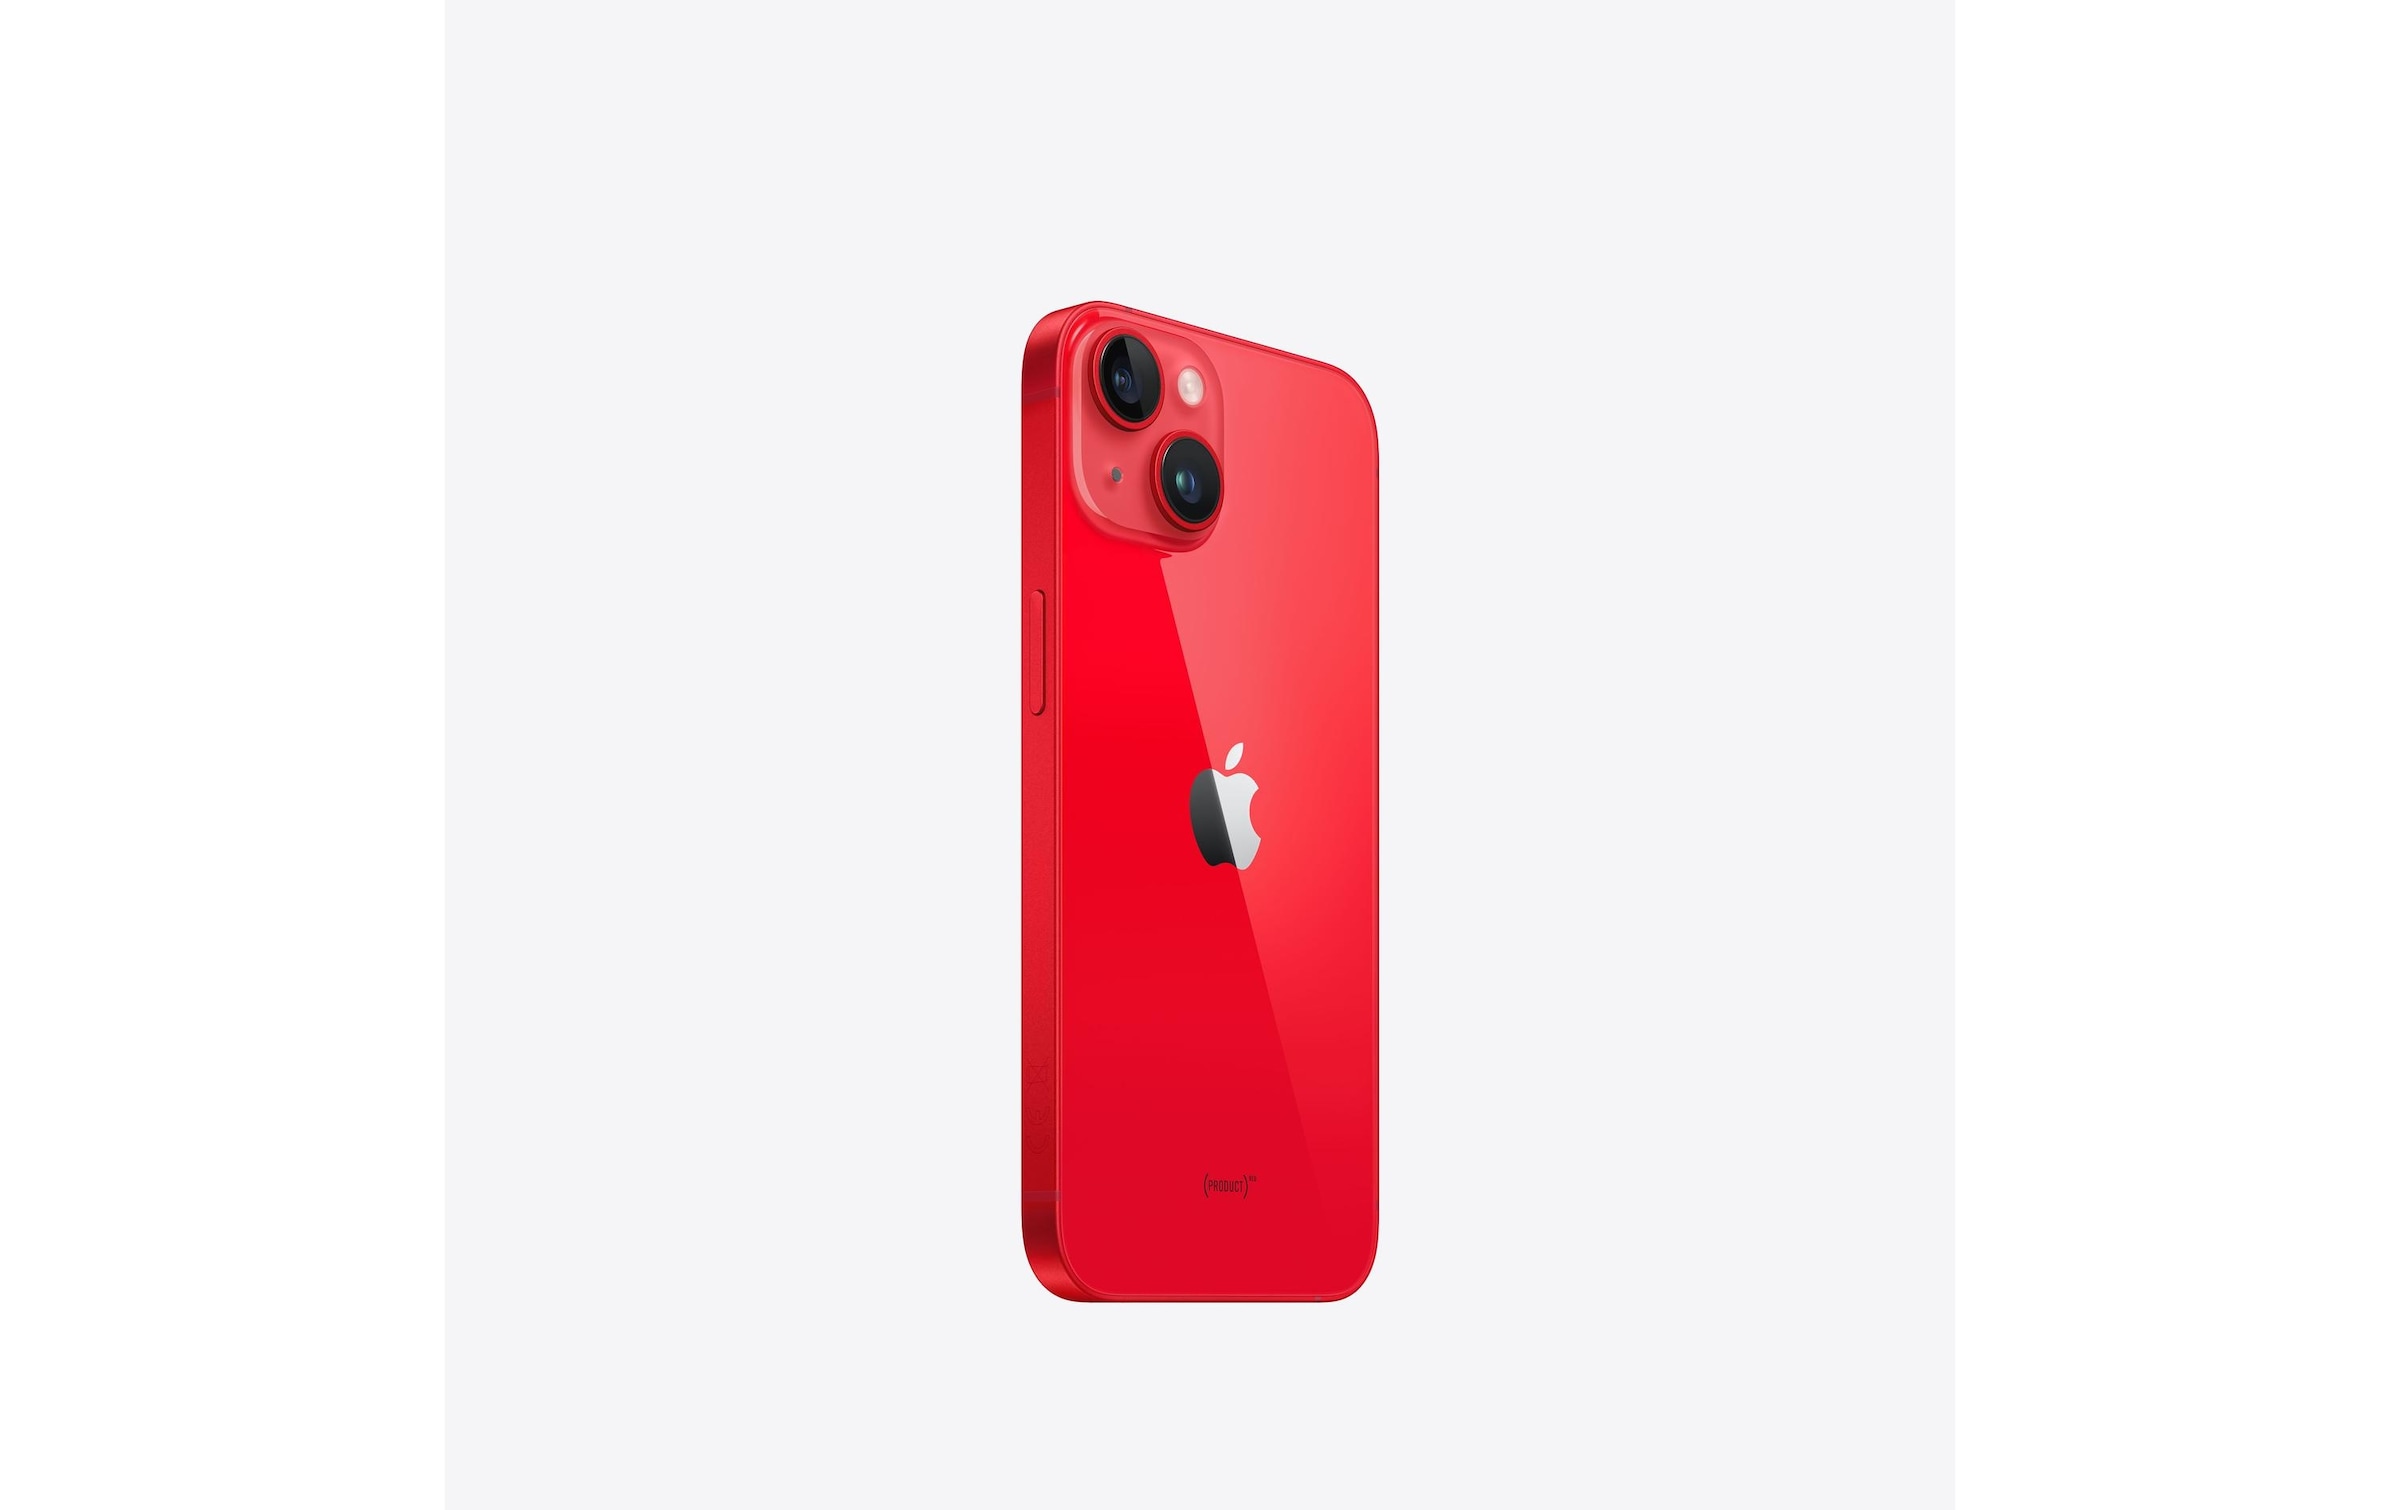 iPhone 14, 256 GB, Product RED